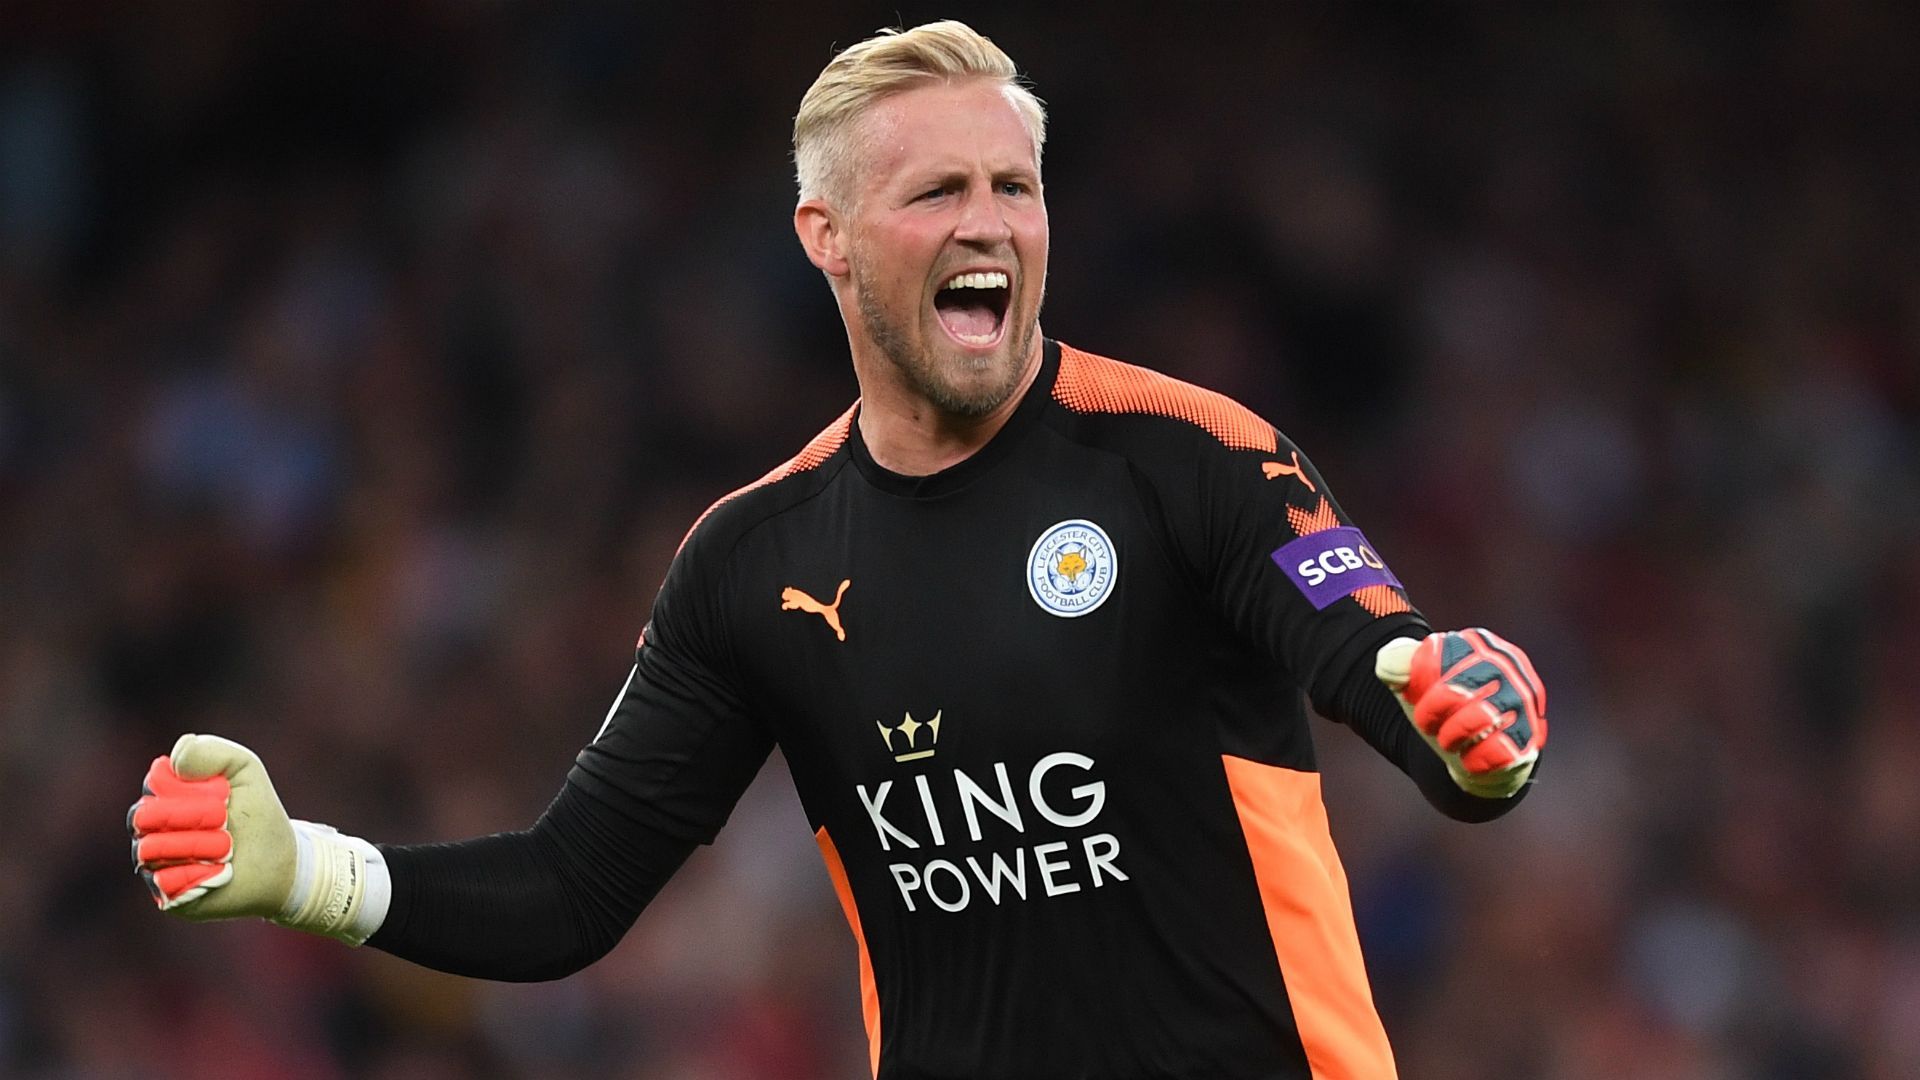 Kasper Schmeichel eclipses dad Peter with Old Trafford penalty save